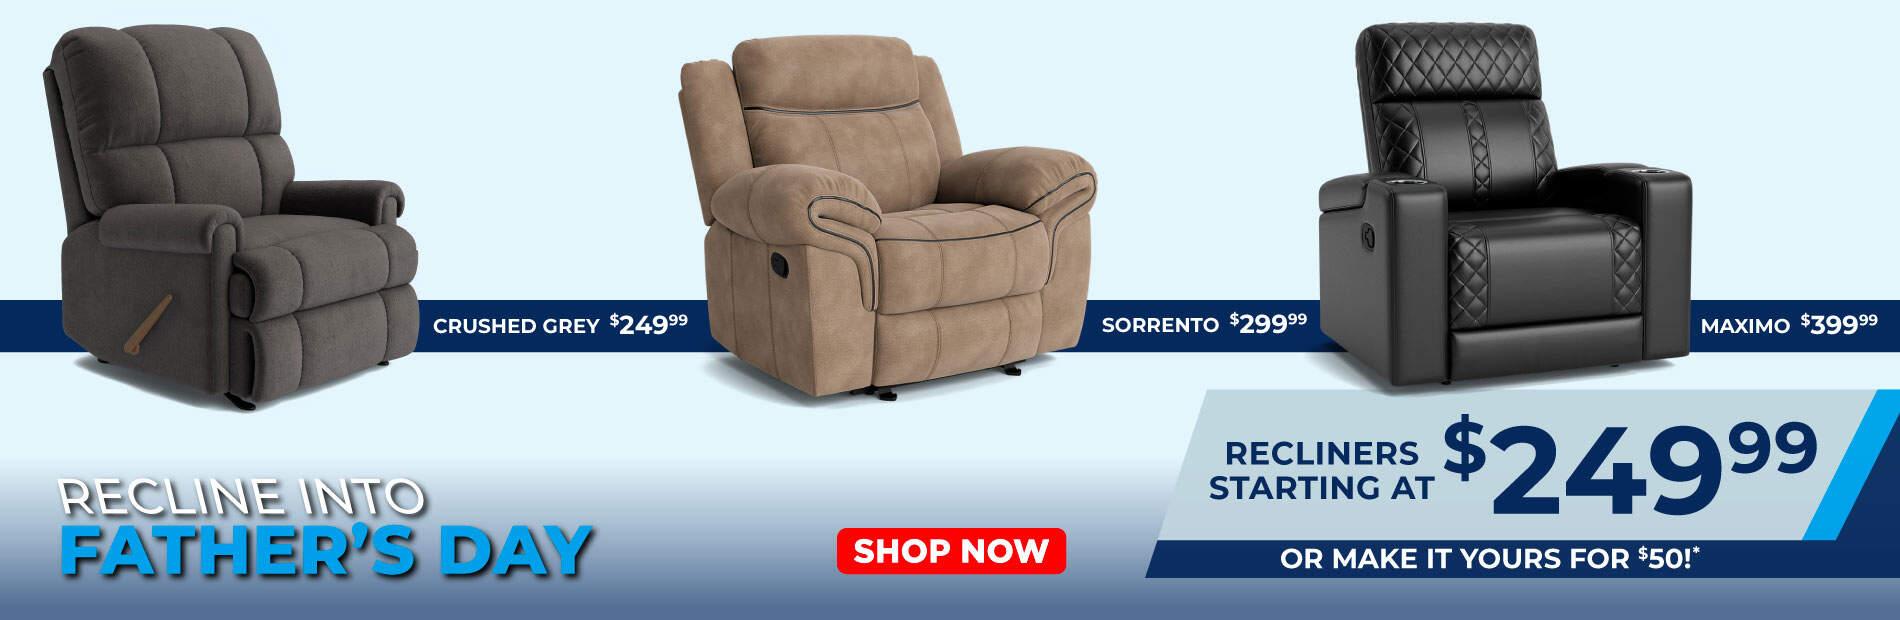 Recline into fathers day! Crushed grey $249.99 Sorrento $299.99 Maximo $399.99. Recliners starting at $249.99 or make it yours for $50. Shop now.